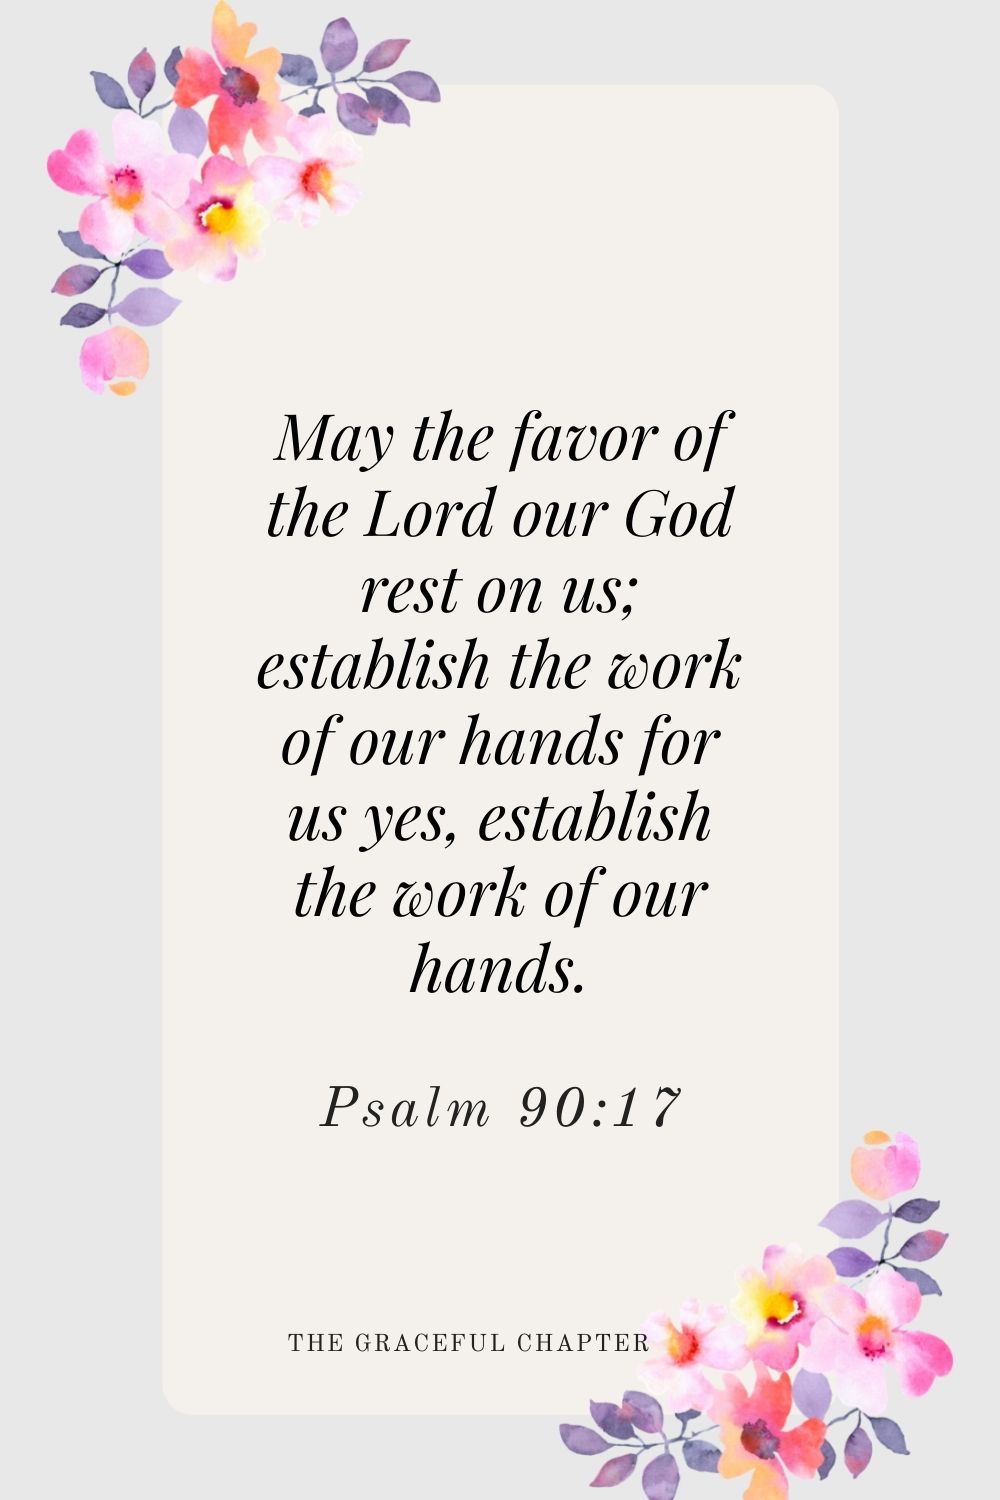 May the favor of the Lord our God rest on us; establish the work of our hands for us yes, establish the work of our hands. Psalm 90:17